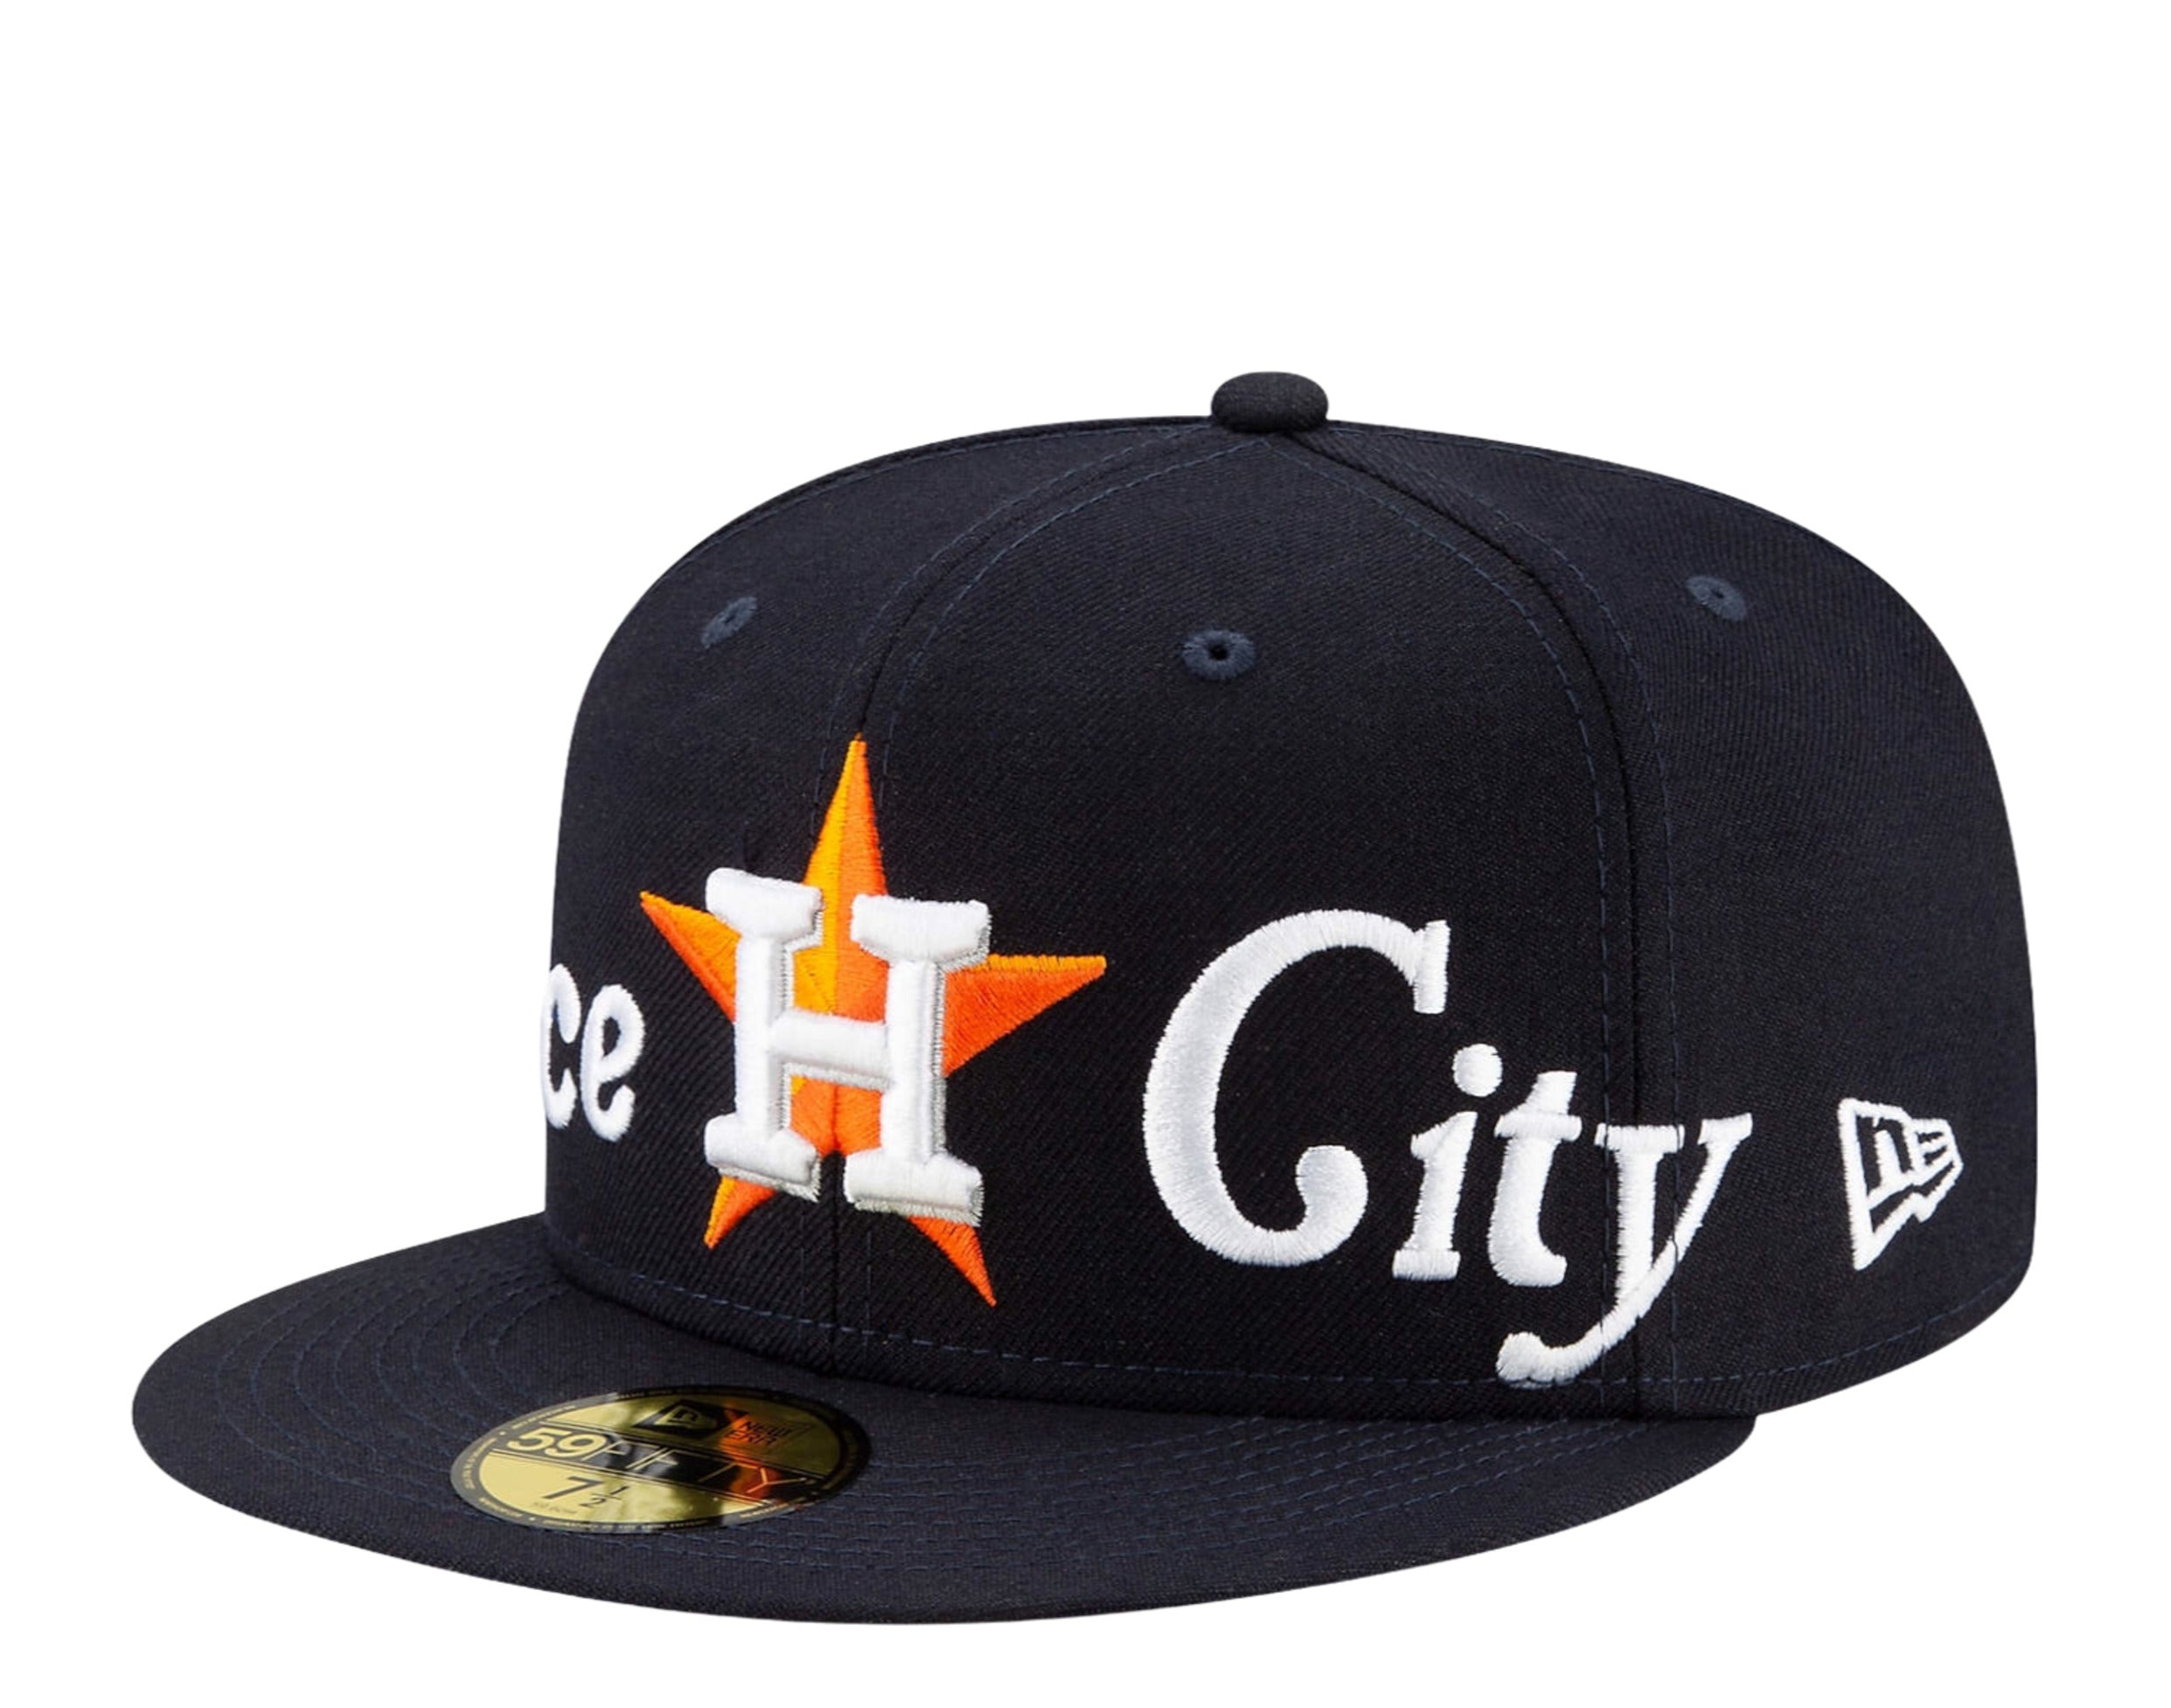 Houston Astros Space City Hats for Sale in Houston, TX - OfferUp